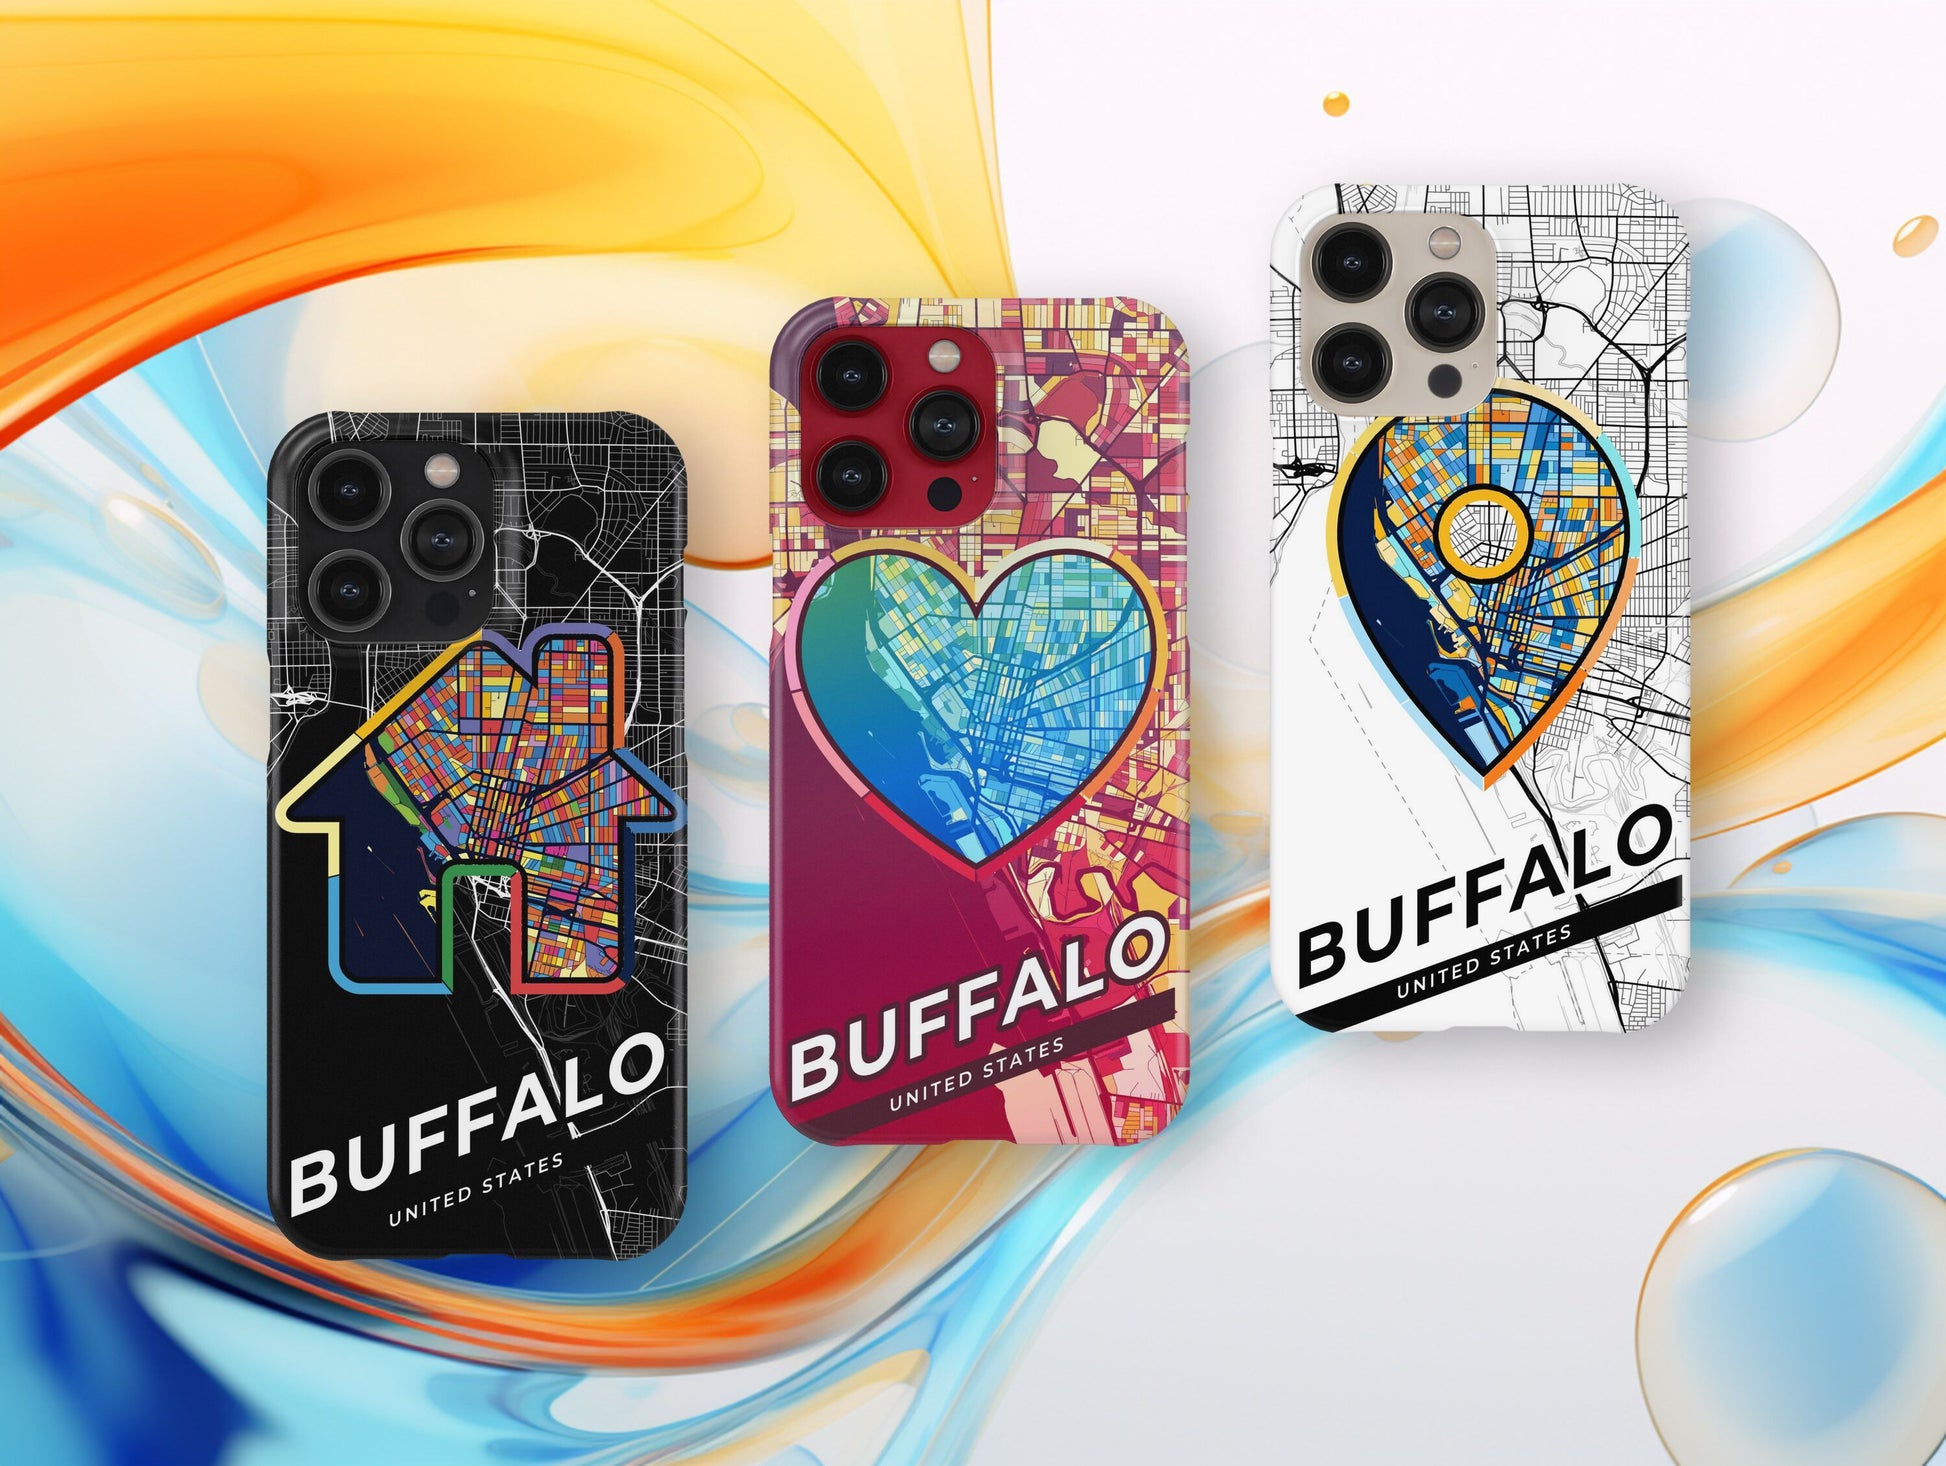 Buffalo New York slim phone case with colorful icon. Birthday, wedding or housewarming gift. Couple match cases.